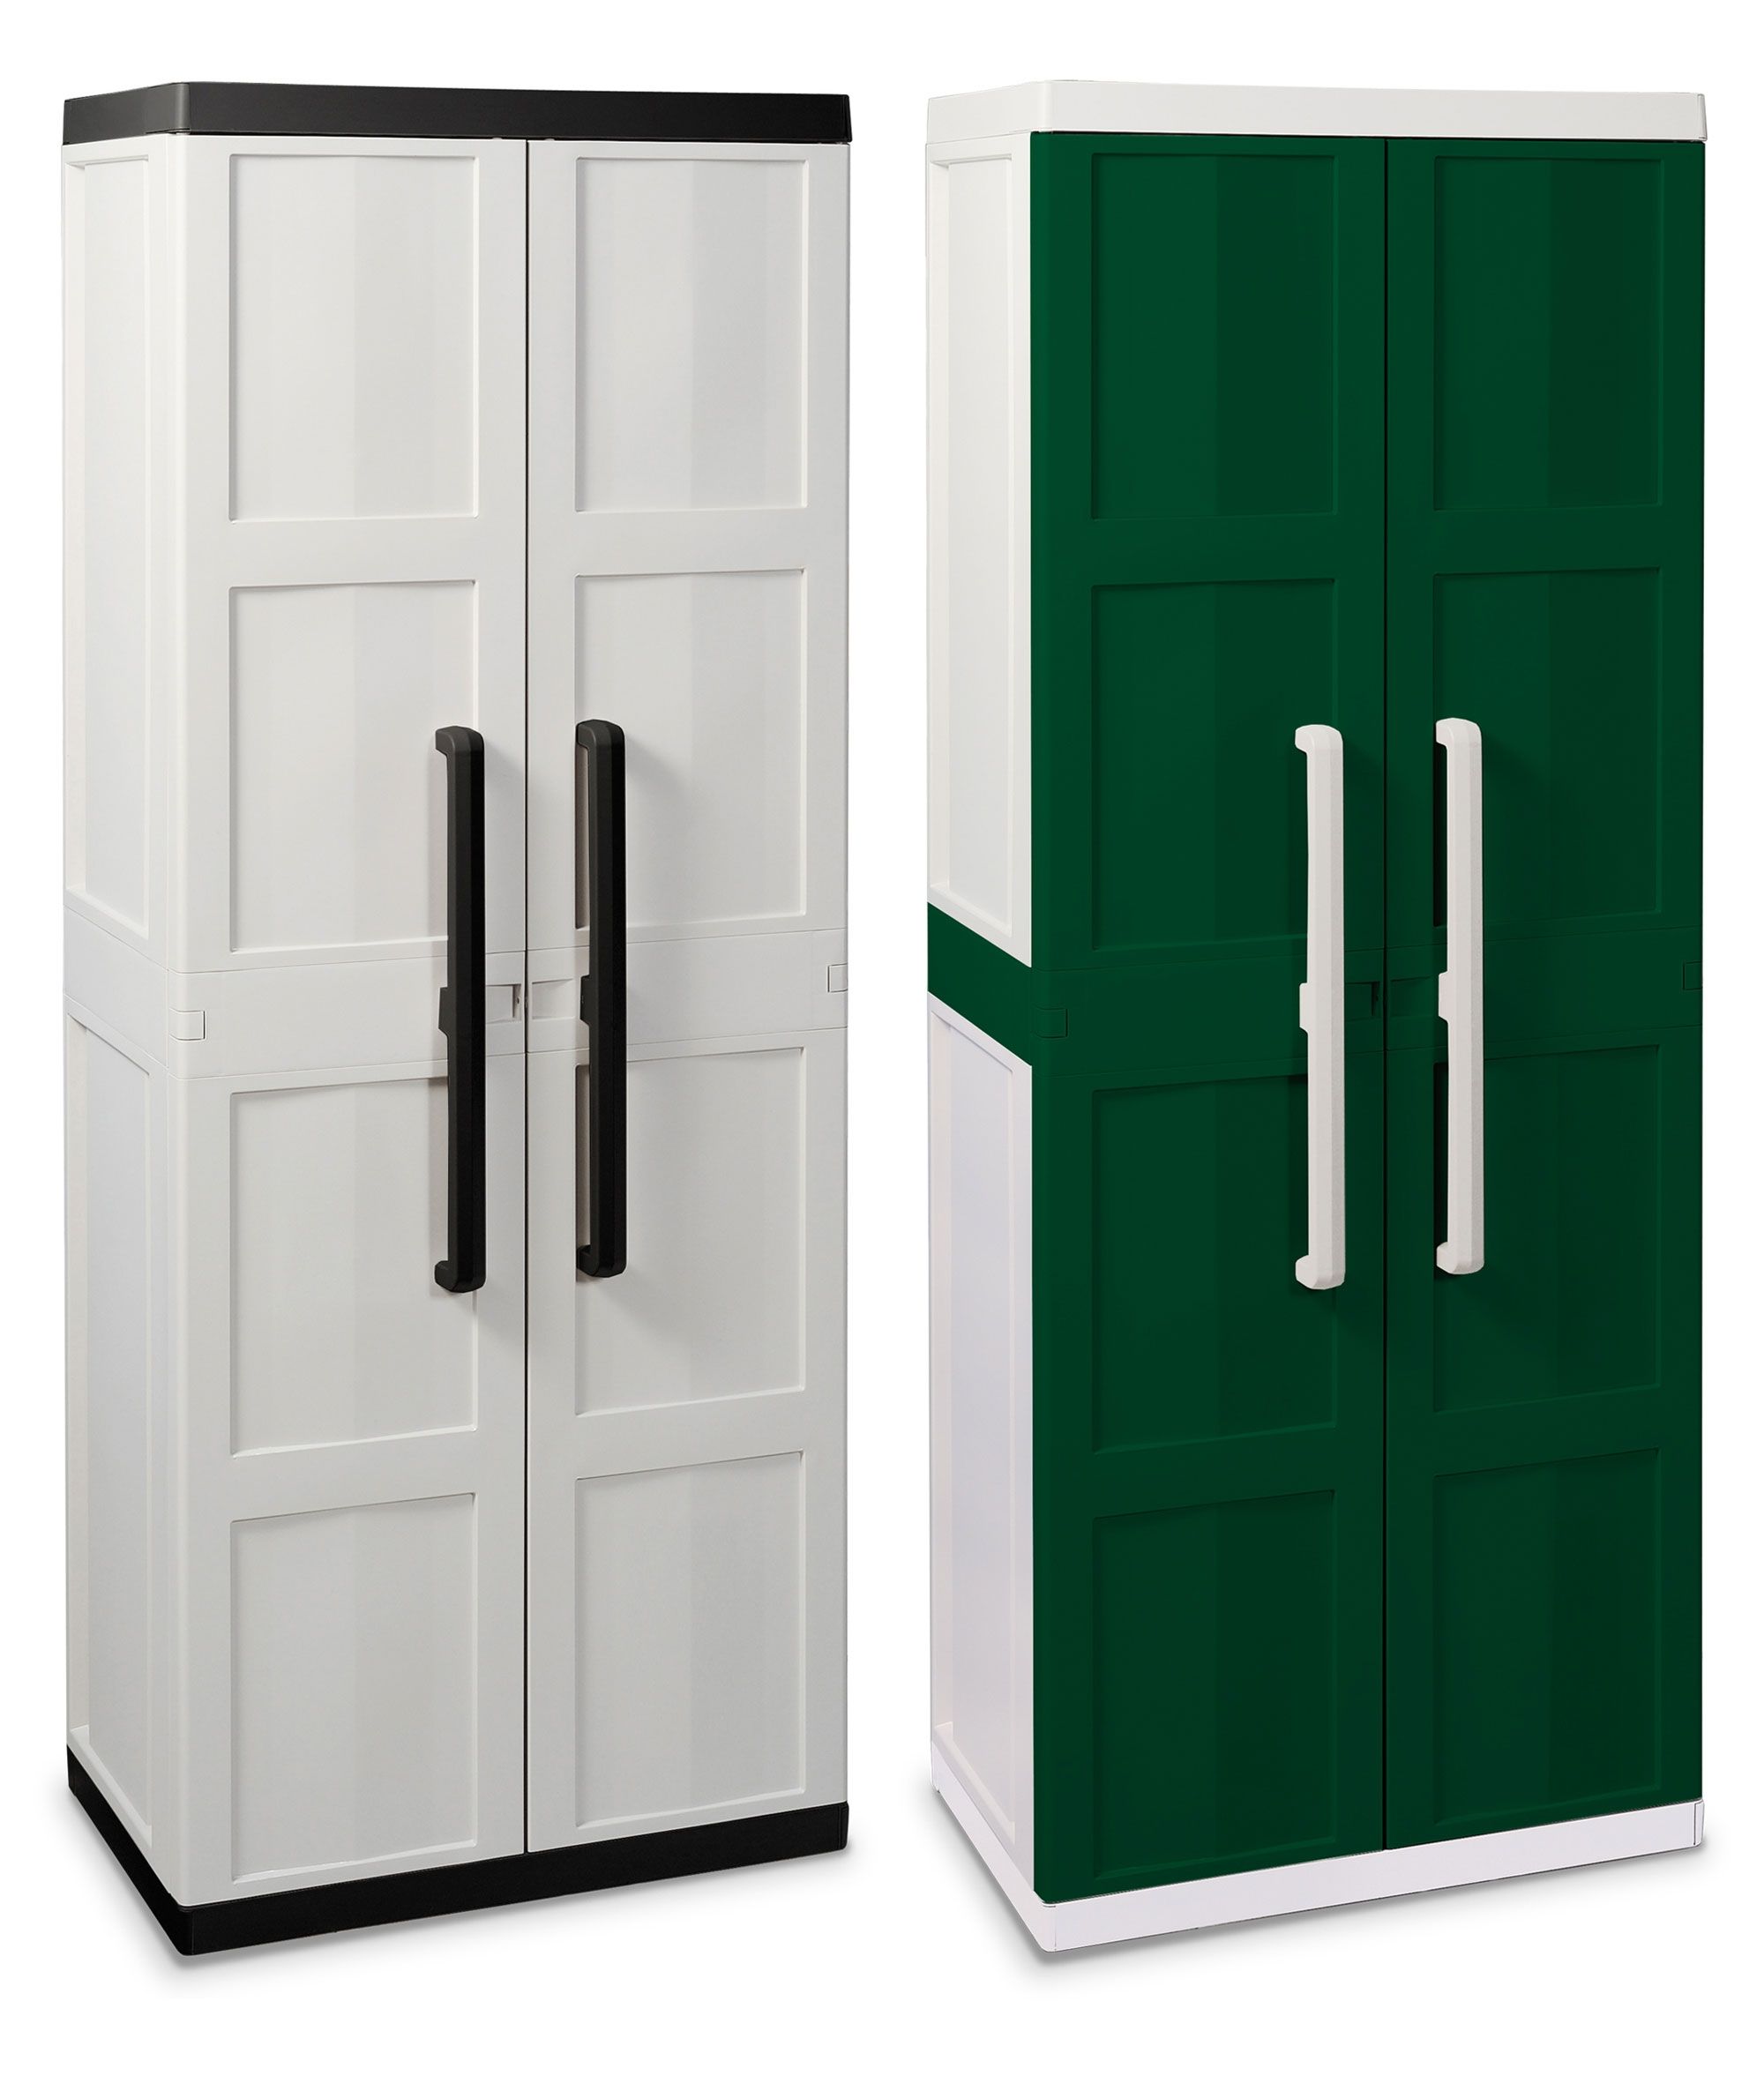 Upright Storage Cupboard Creative Cabinets Decoration Regarding Large Storage Cupboards (View 7 of 15)